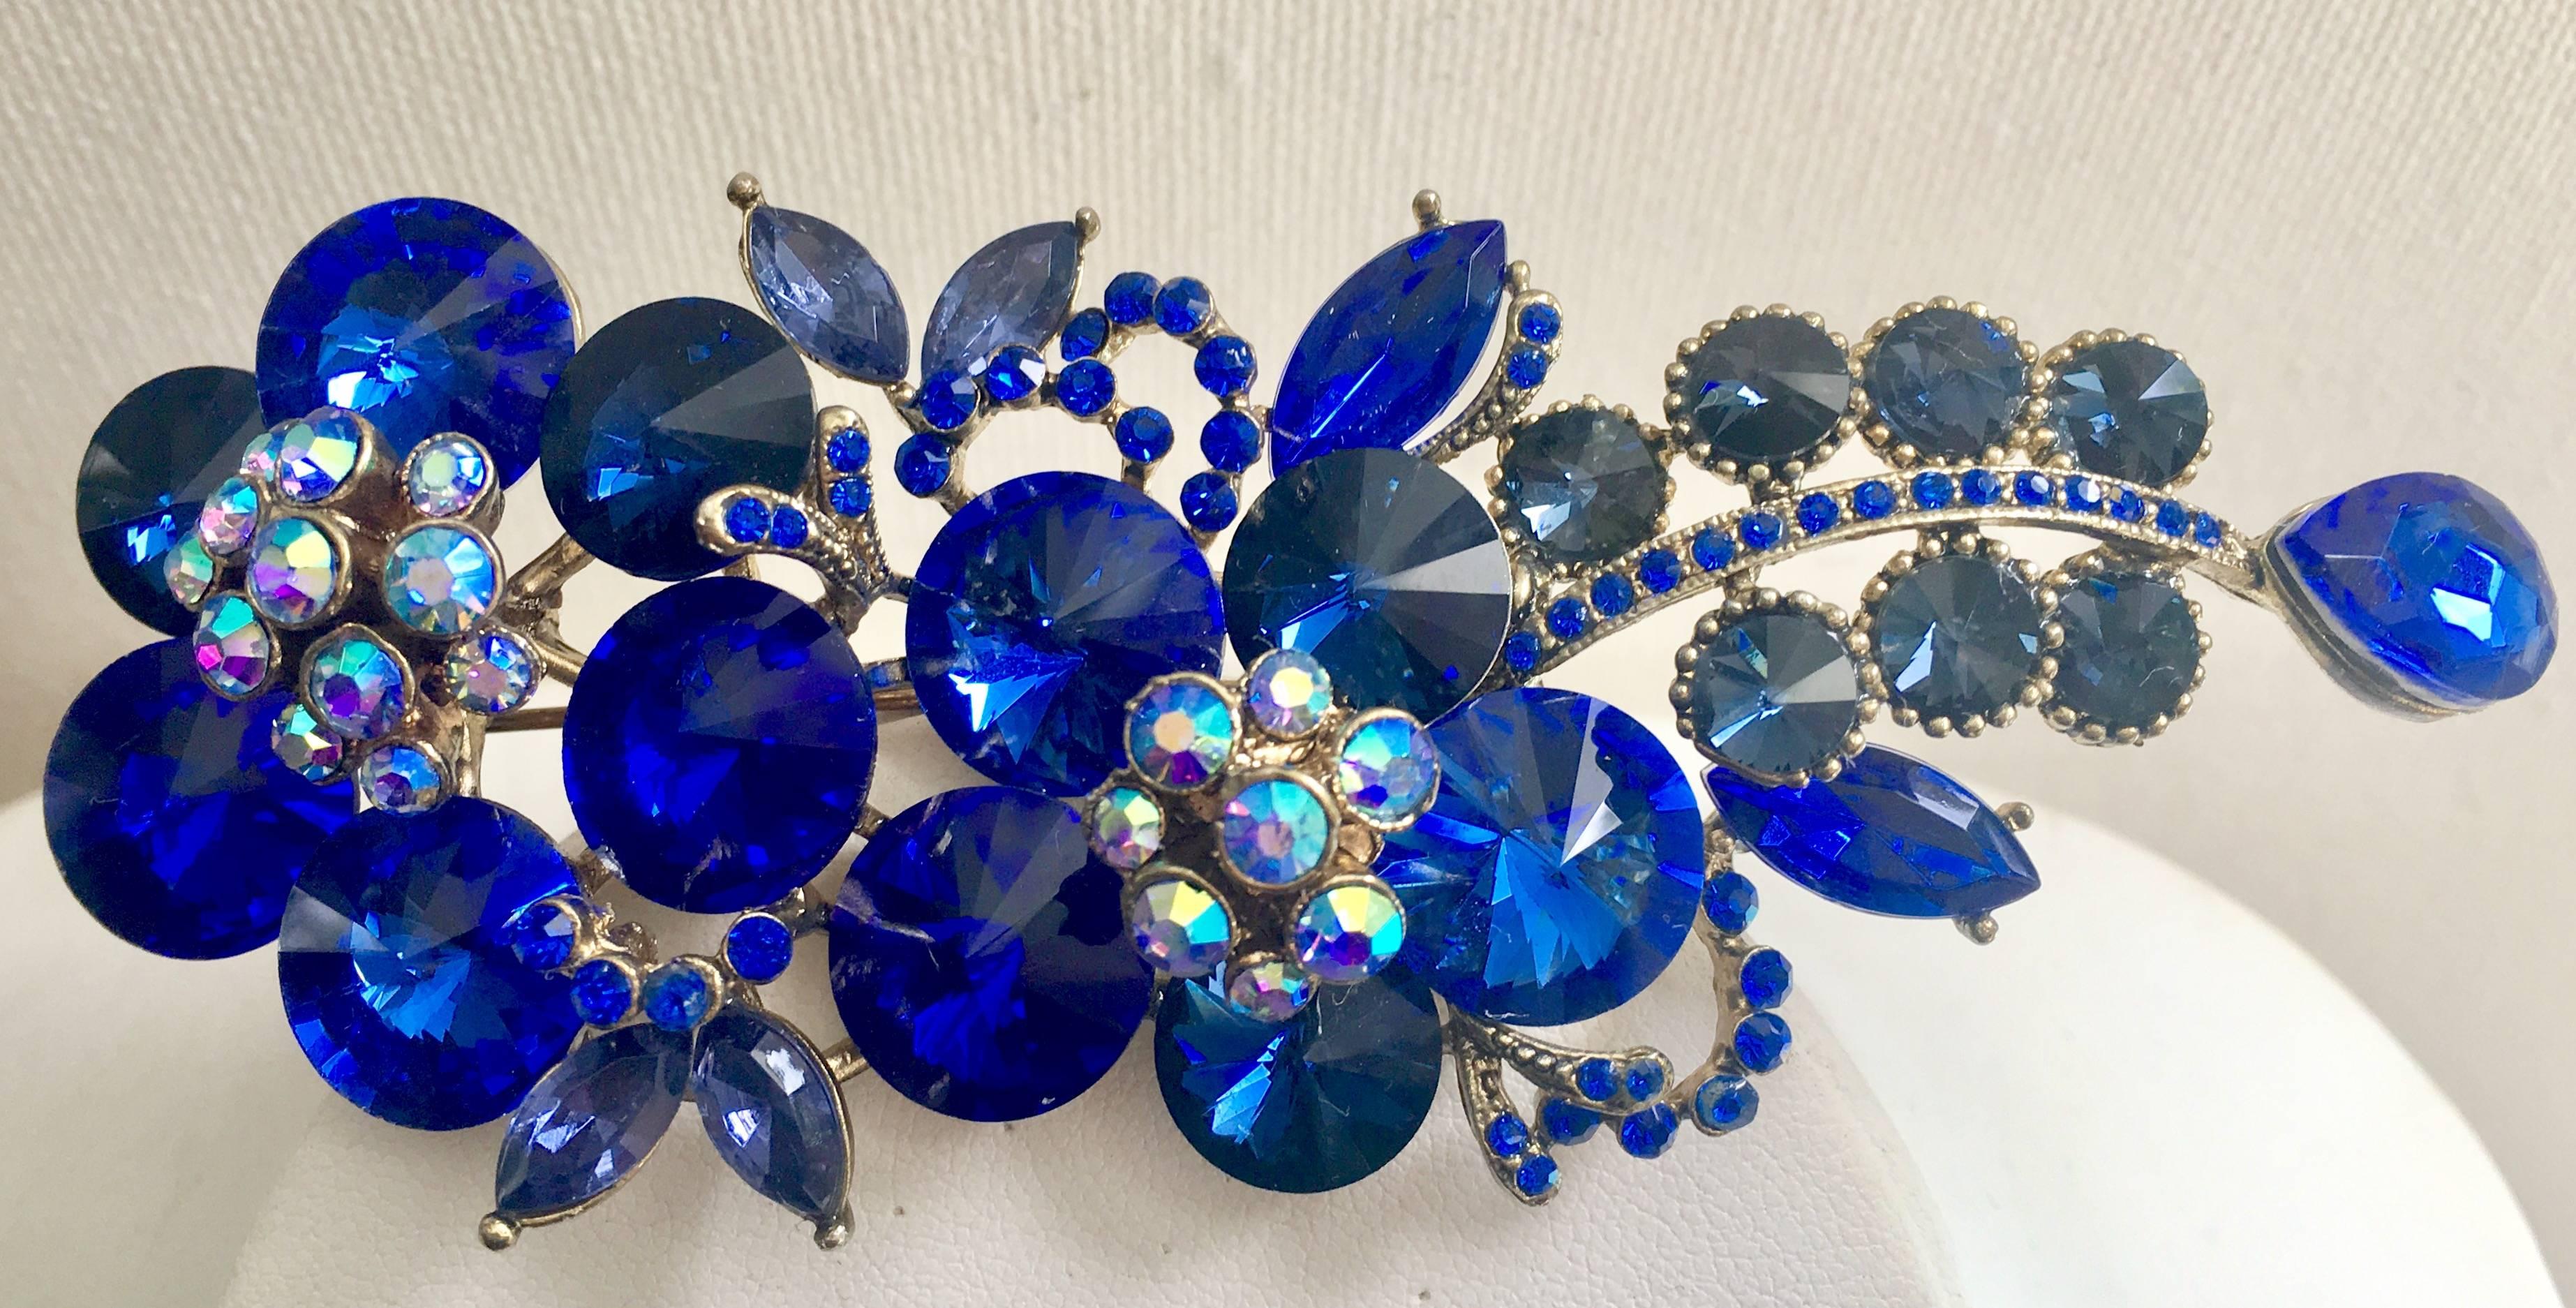 Rare, incredible and monumental peacock blue sapphire Swarofski crystal round rivoli stone double flower brooch. Set in gold tone metal featuring projected florets with Aurora borealis crystal stones. Brooch projects, 1" inch and is 4.25"